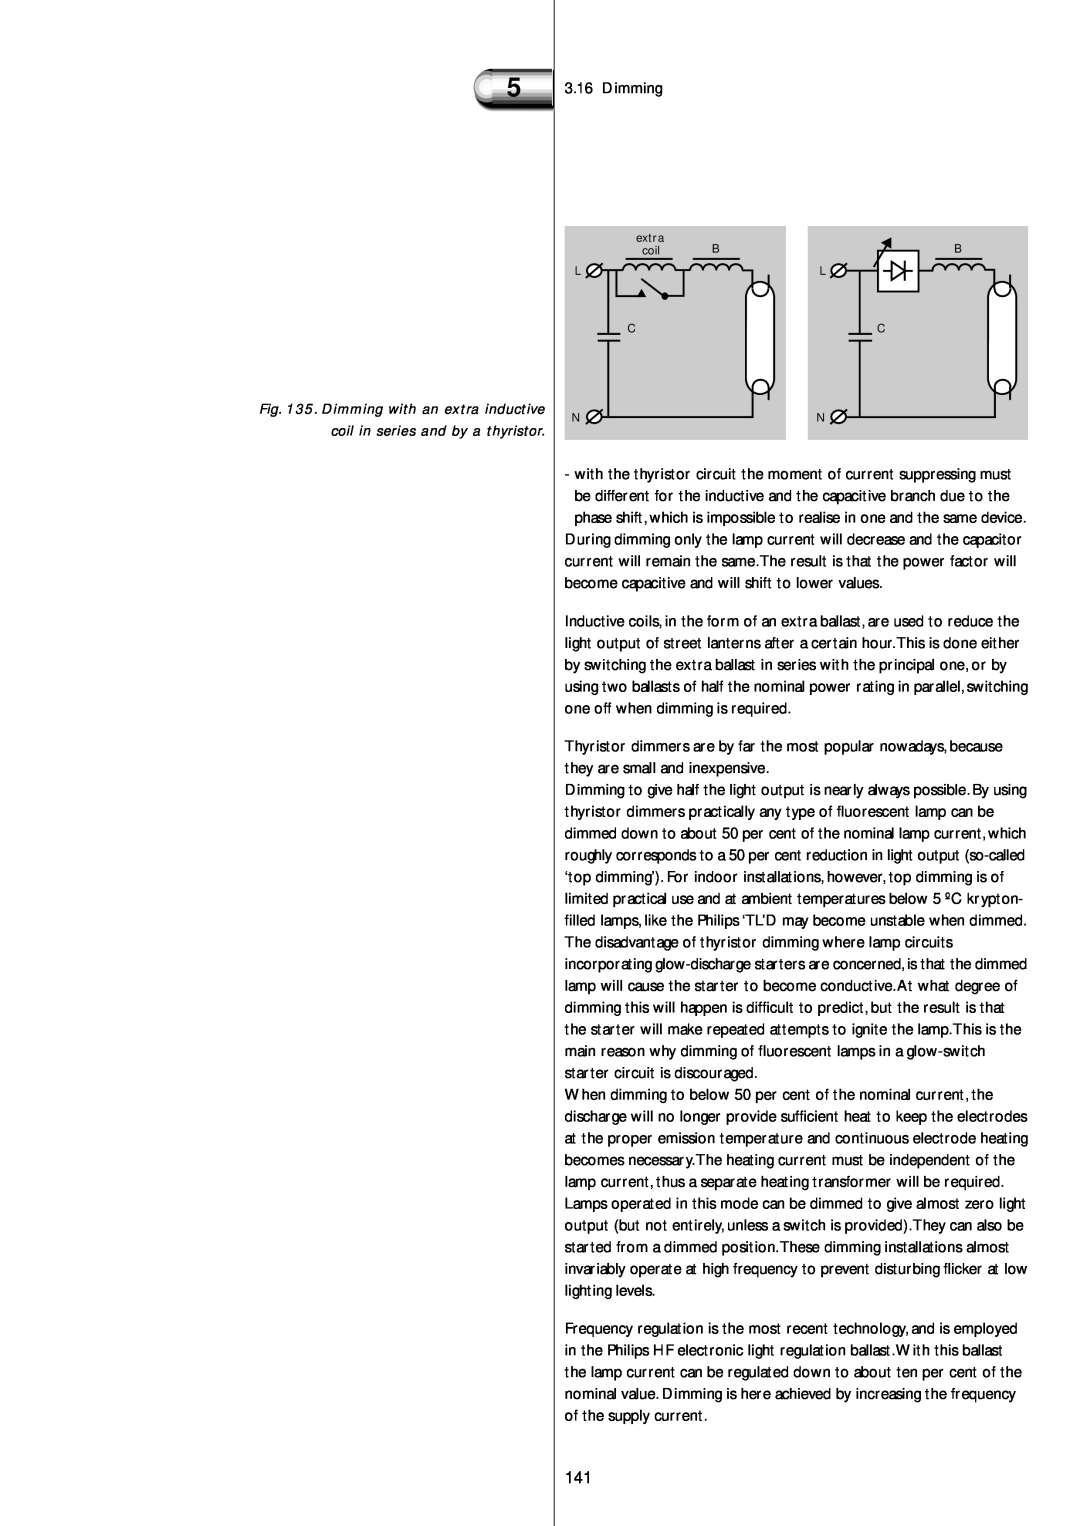 Philips Electromagnetic Lamp manual Dimming with an extra inductive, coil in series and by a thyristor 